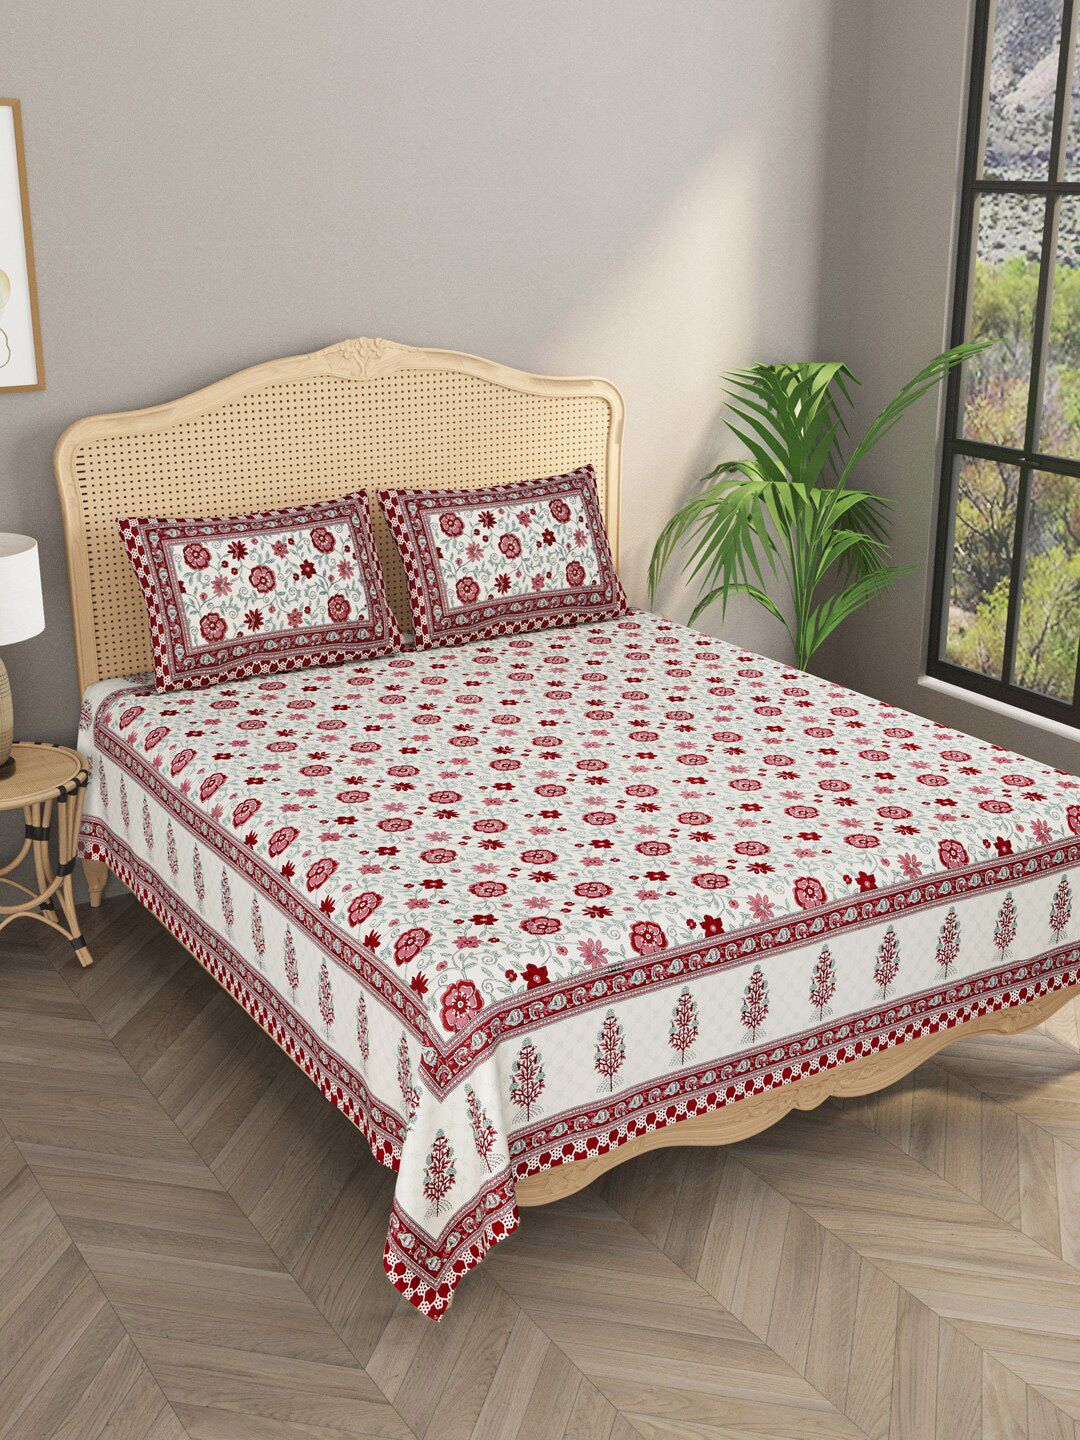 Gulaab Jaipur Cream-Coloured & Red Floral Cotton 600 TC King Bedsheet with 2 Pillow Covers Price in India